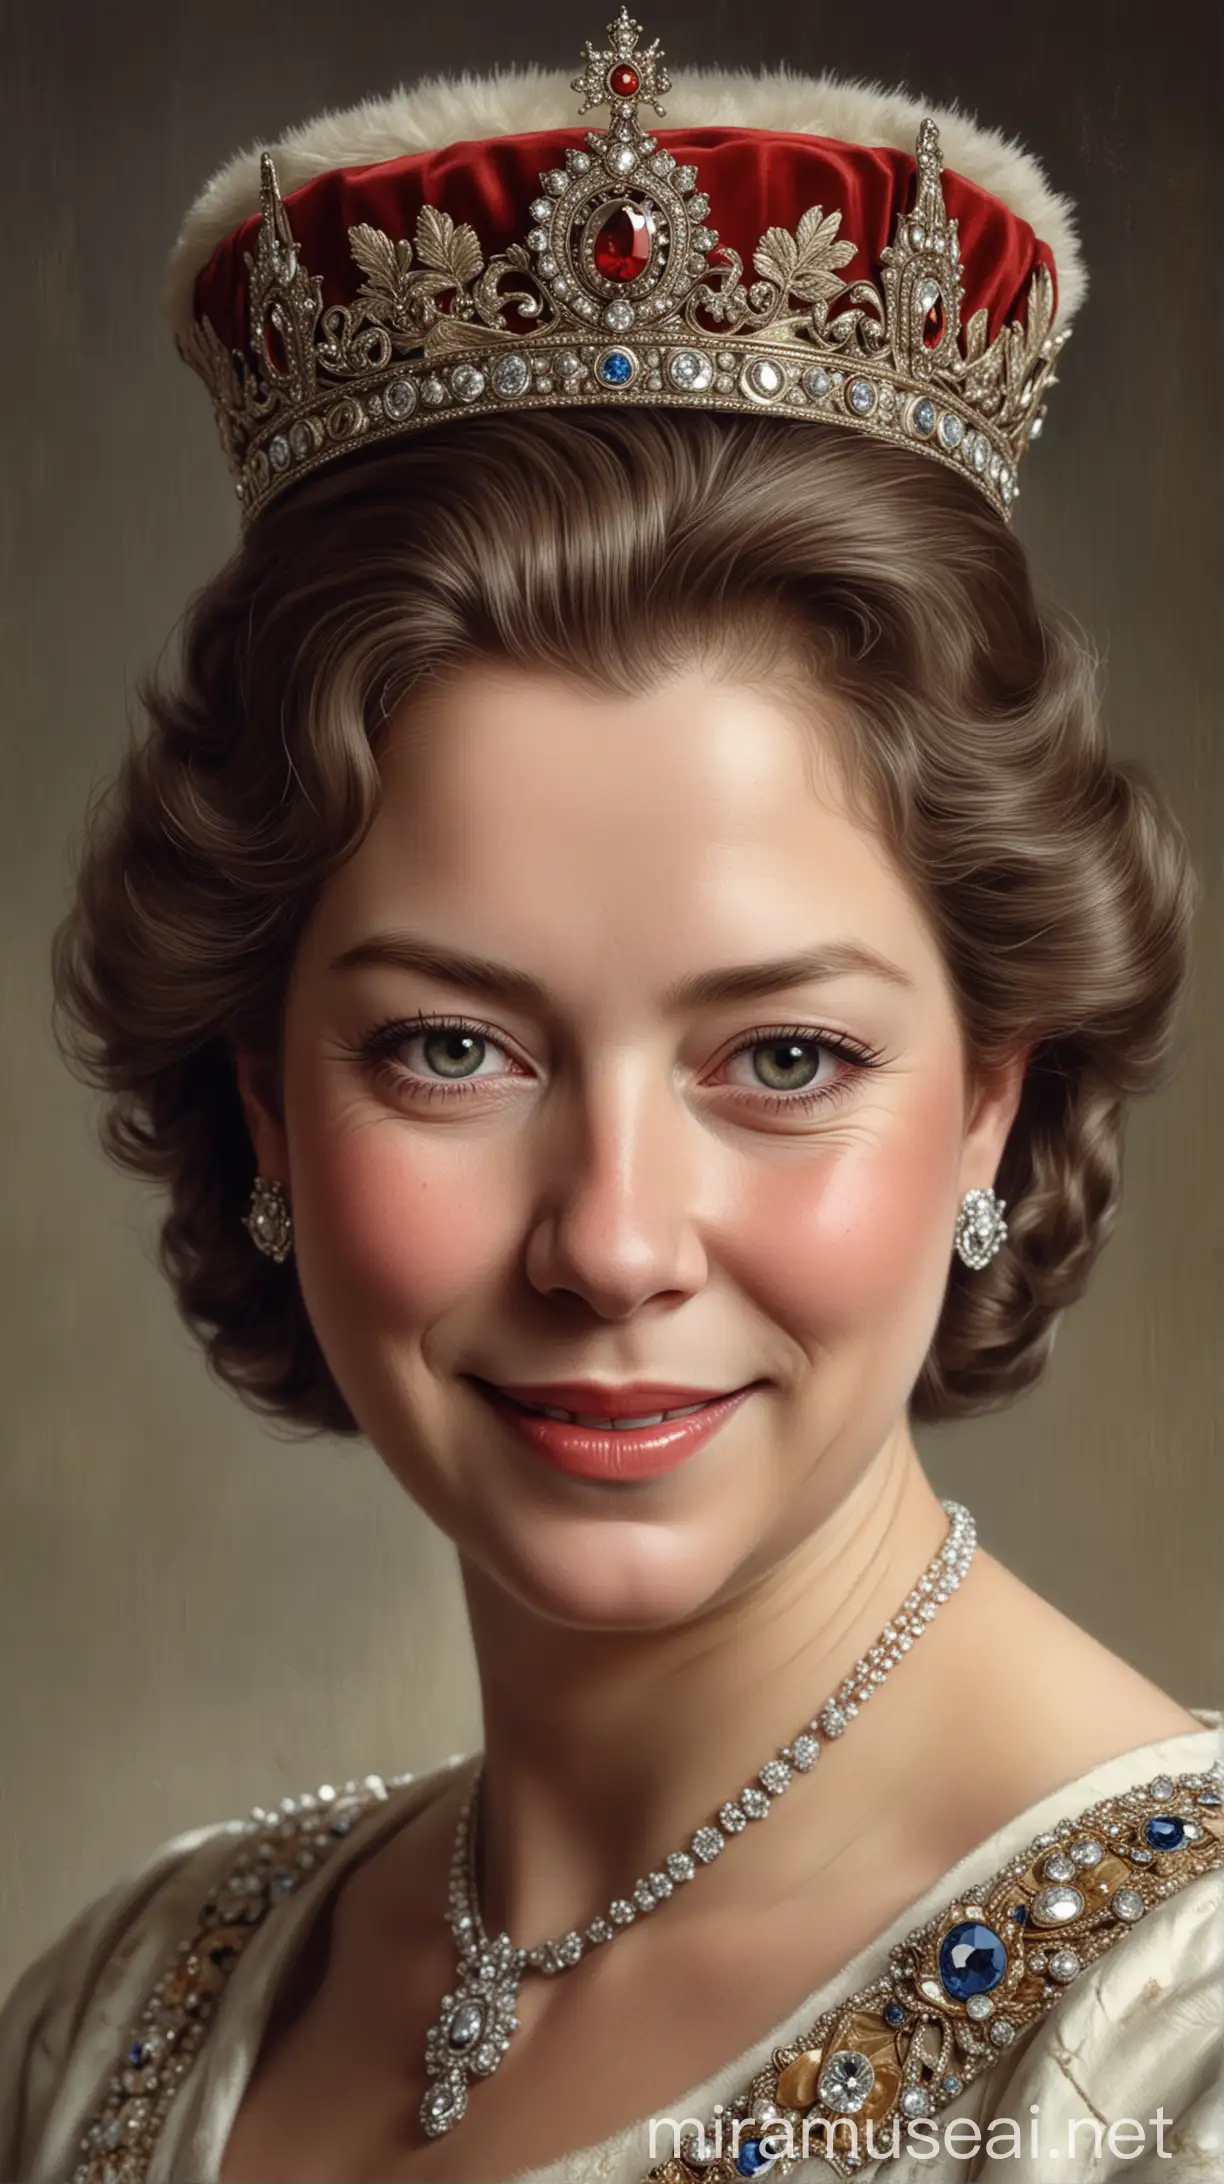  An illustration of Queen Elizabeth II as a young woman, wearing a crown and royal regalia, with a subtle smile and a hint of determination in her eyes. hyper realictic